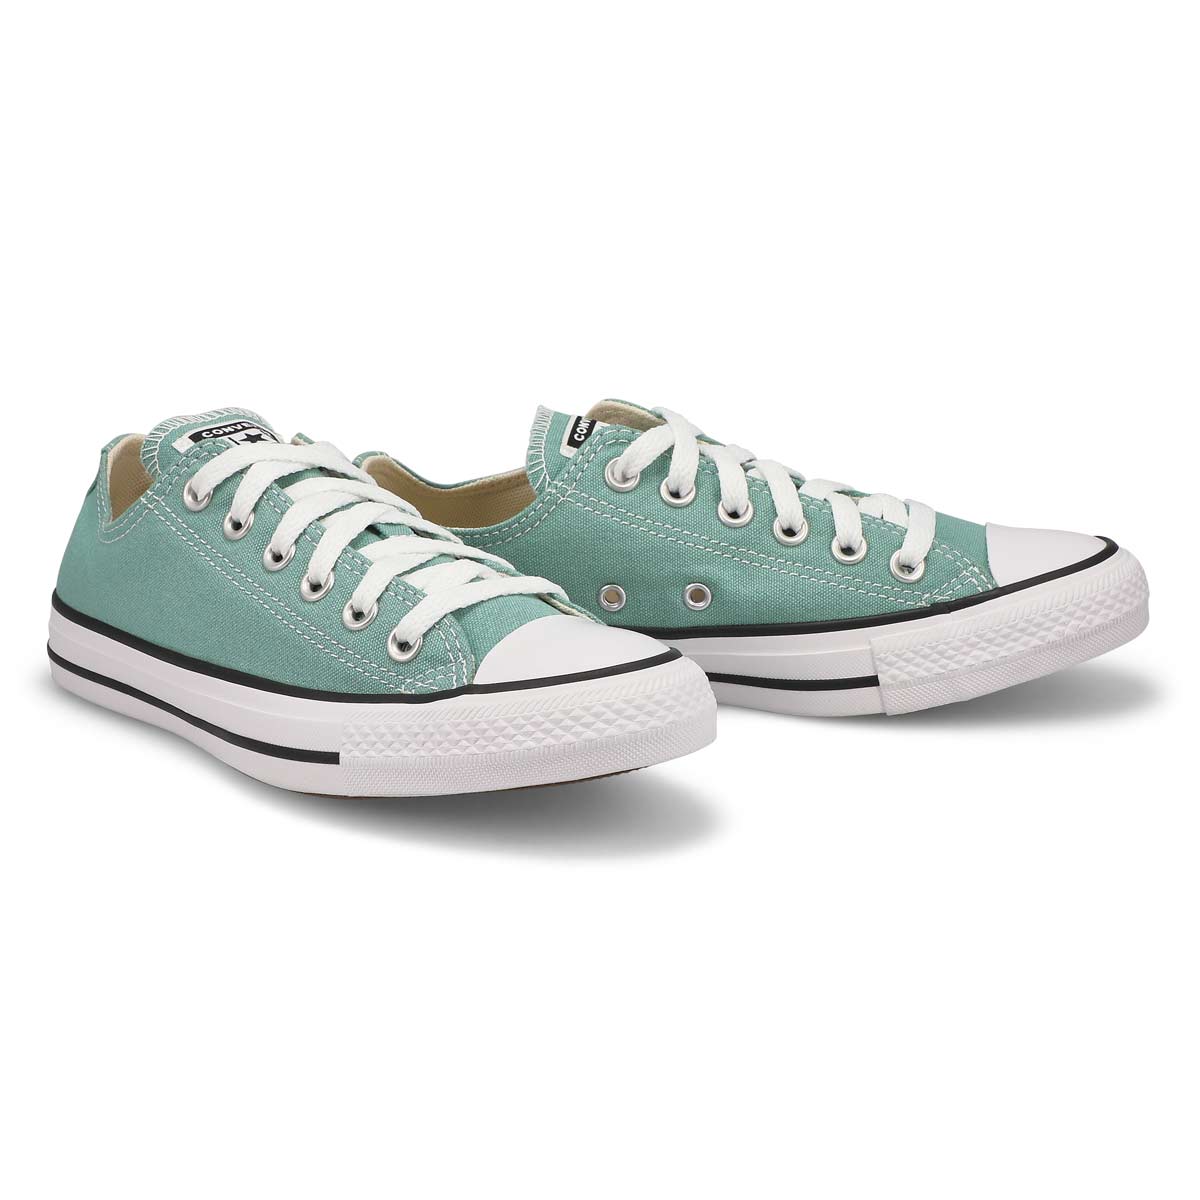 Womens Chuck Taylor All Star Sneaker - Herby